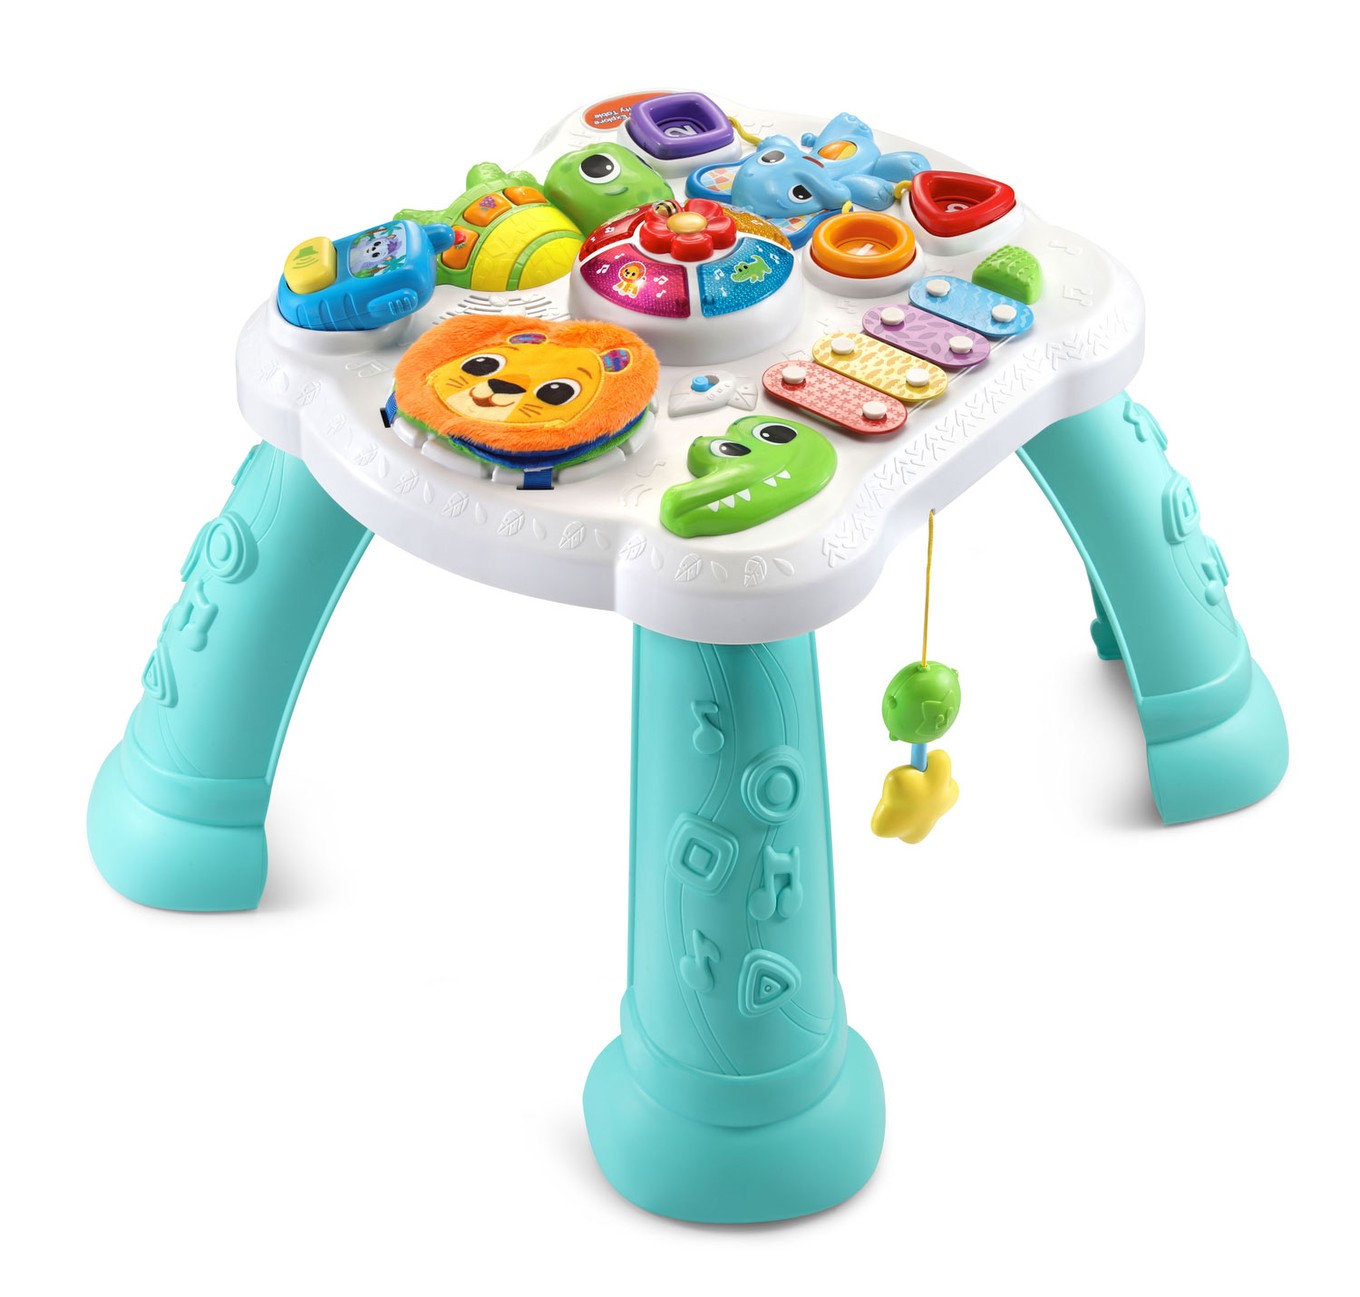 VTech Baby Play and Learn Activity Table - Blue